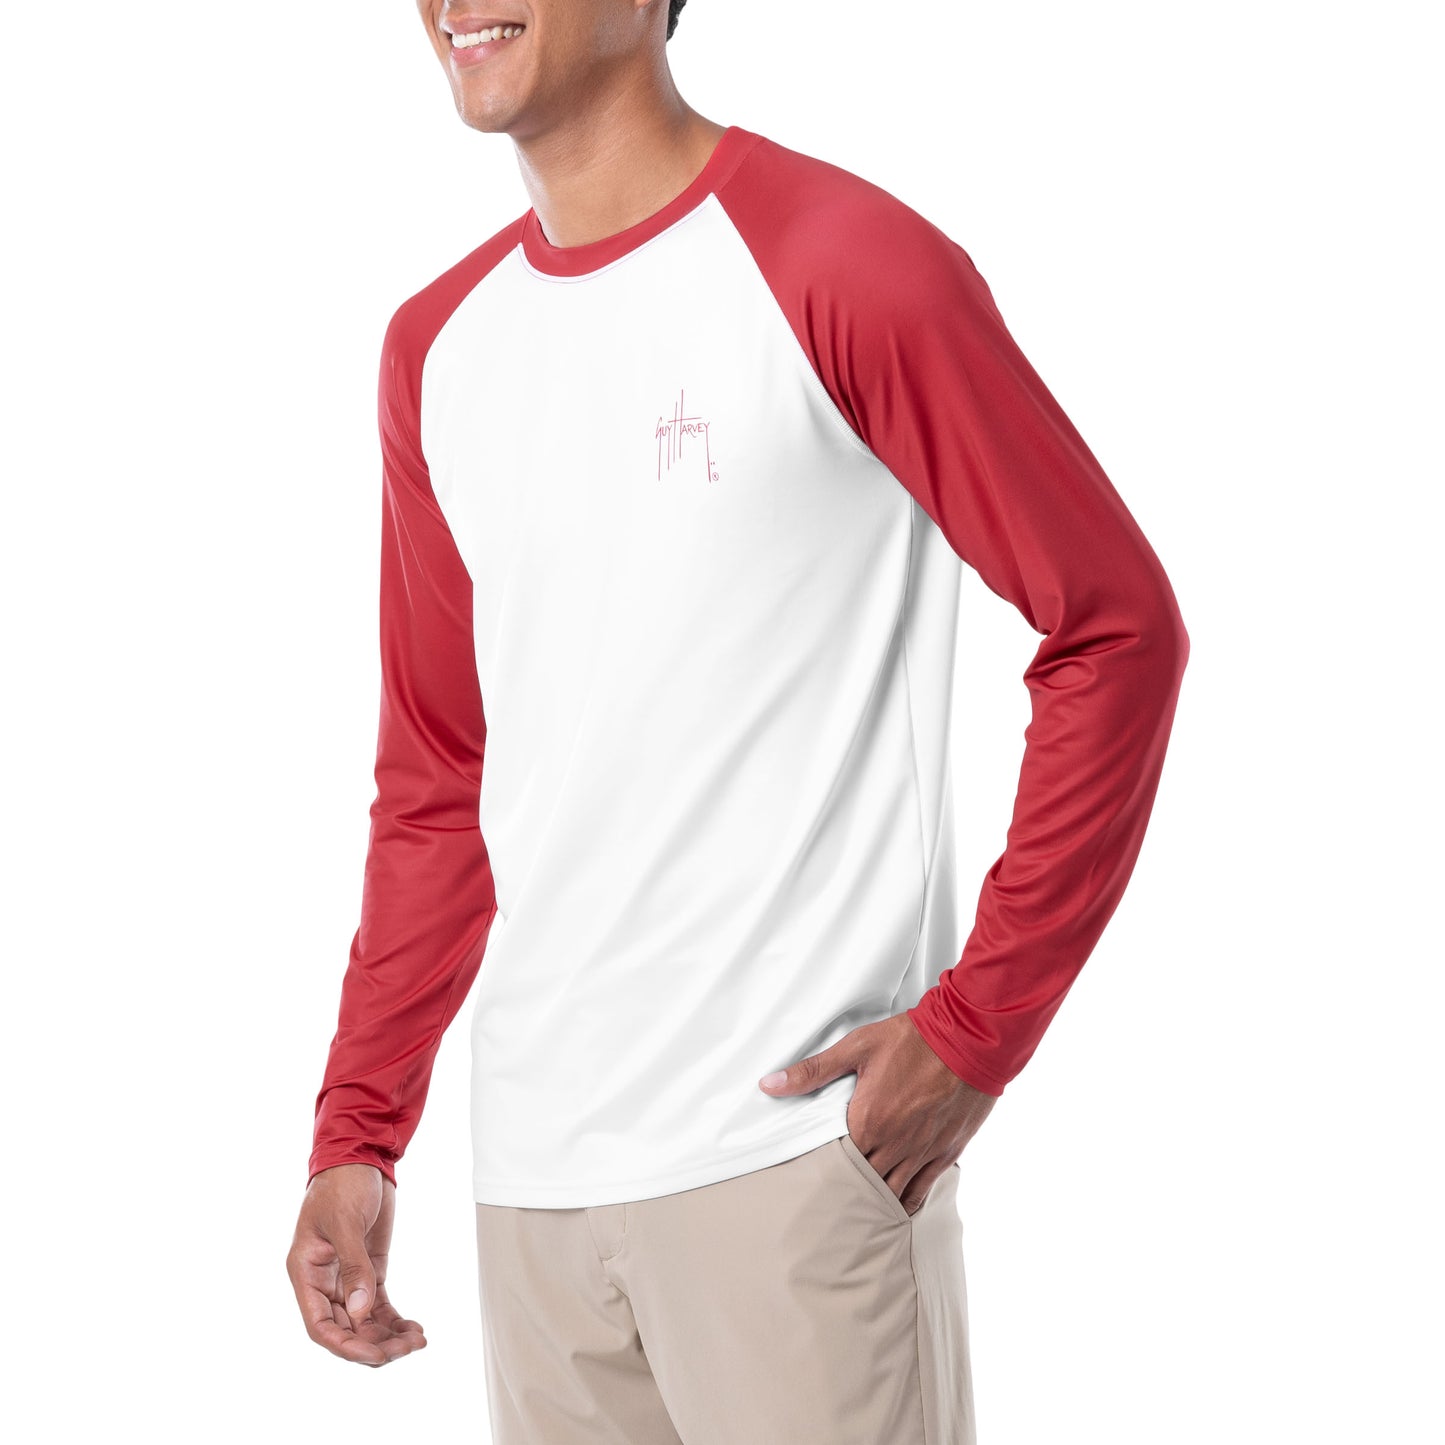 Men's American Shield Colorblocked Sun Protection Top View 3